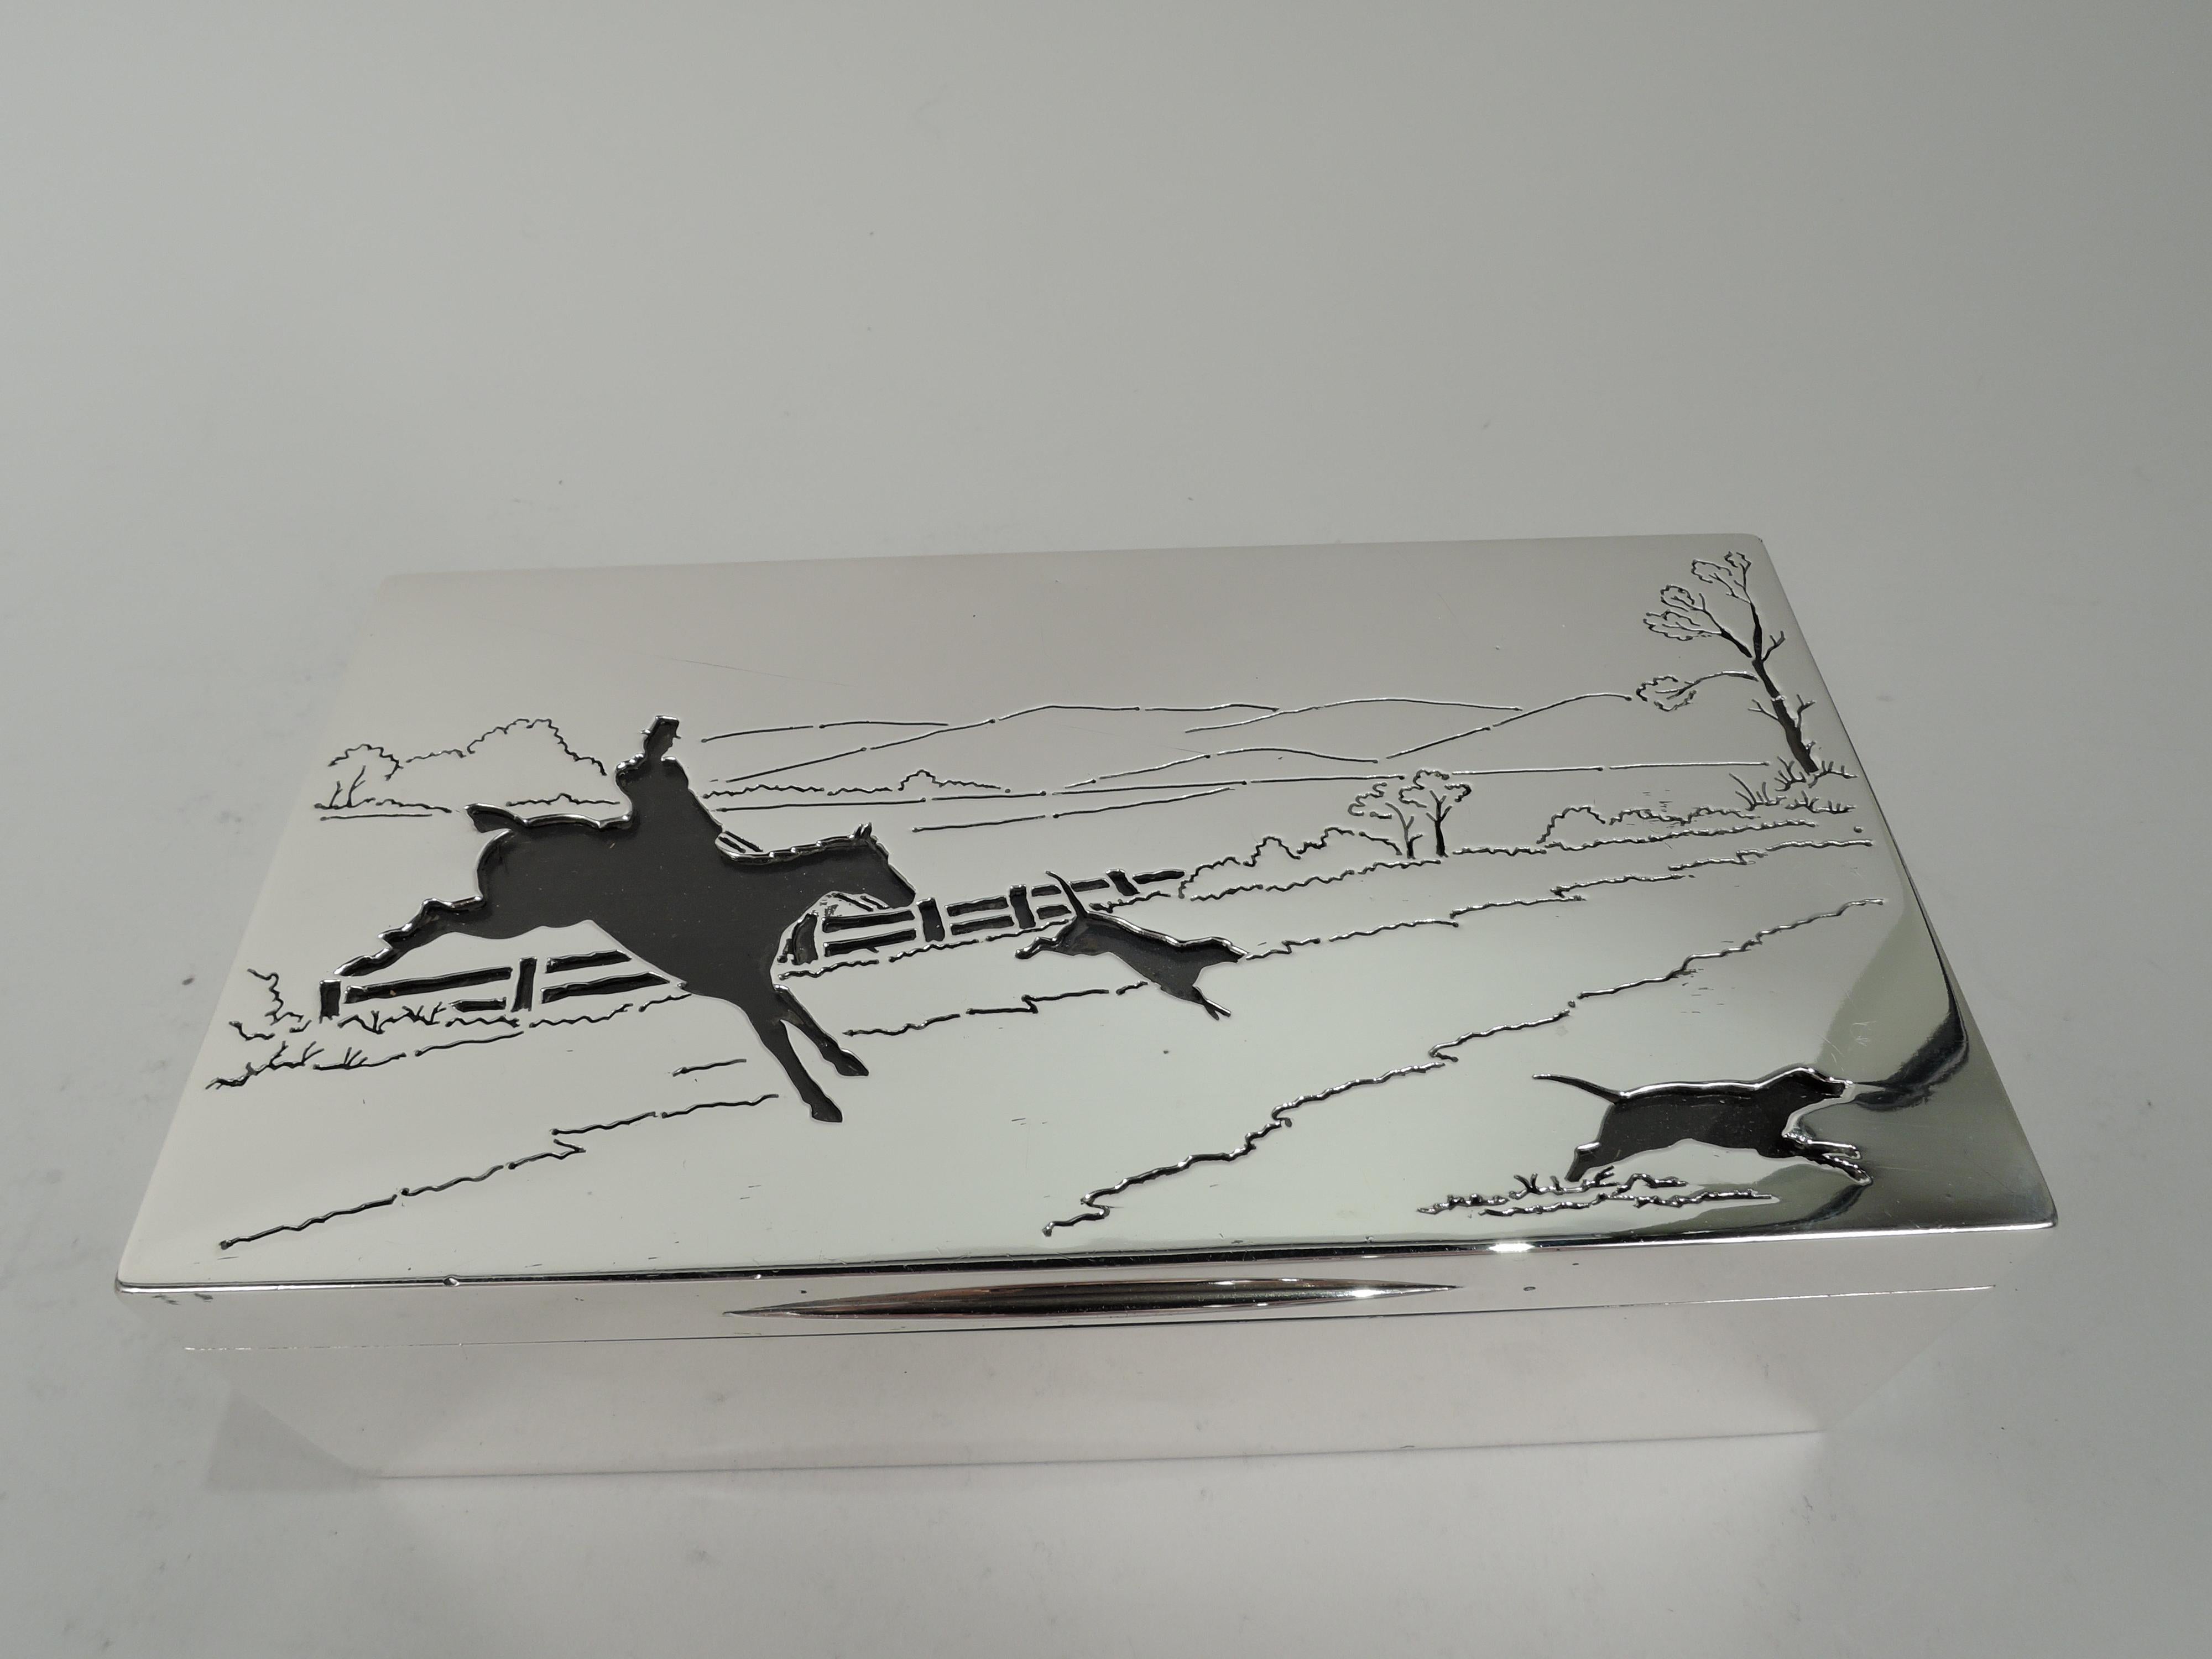 Edwardian sterling silver box. Made by Goldsmiths & Silversmiths Co. Ltd in London in 1910. Rectangular with straight sides. Cover hinged and flat with tapering tab. On cover top is hunting scene. In foreground a horse takes a fence the hounds